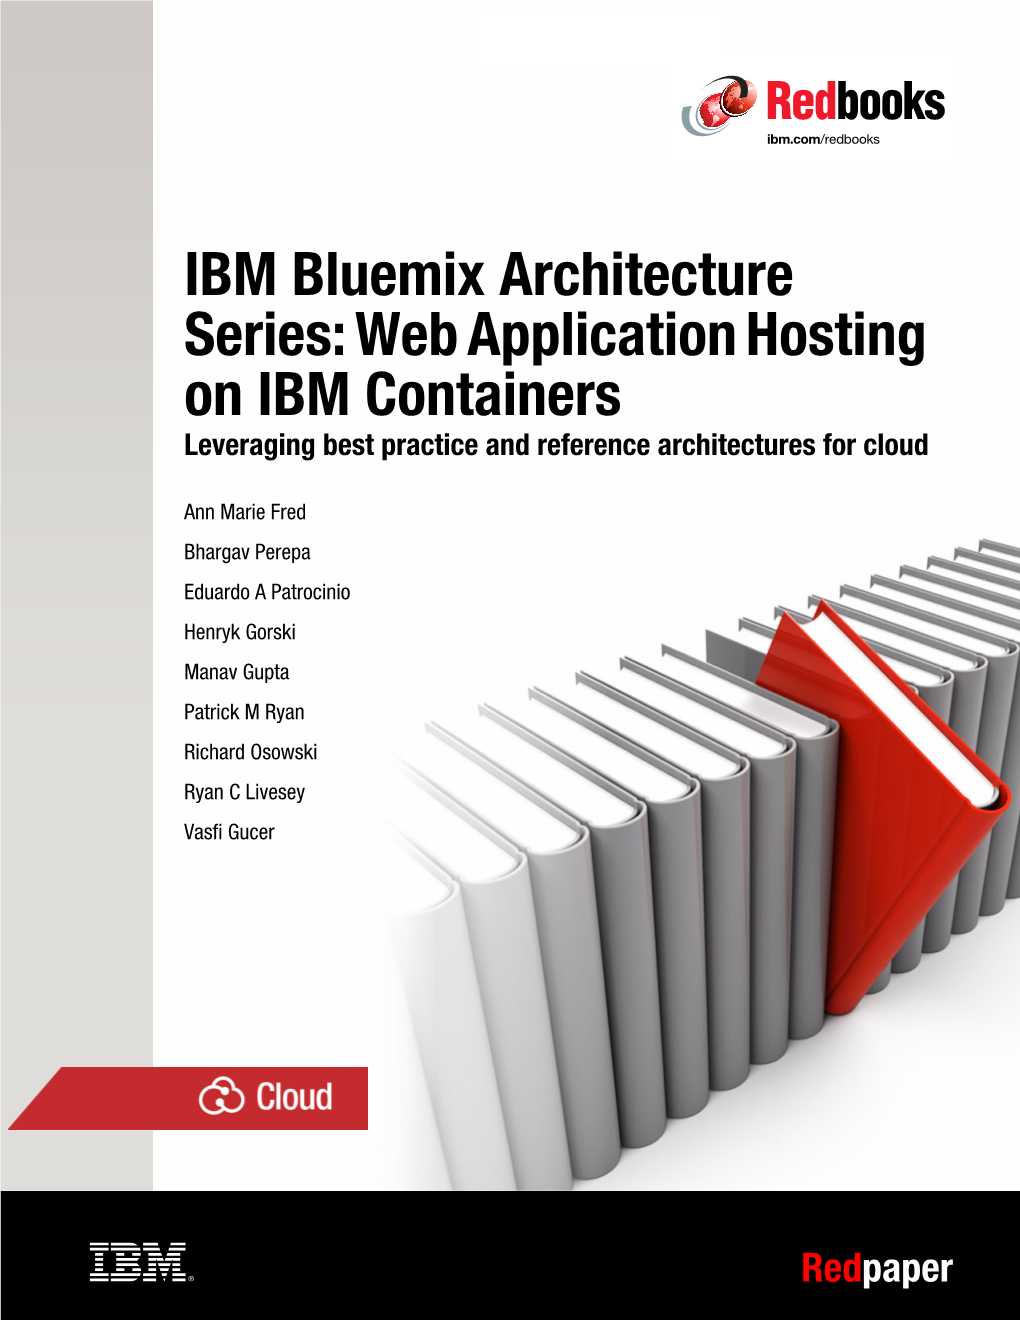 IBM Bluemix Architecture Series: Web Application Hosting on IBM Containers Leveraging Best Practice and Reference Architectures for Cloud